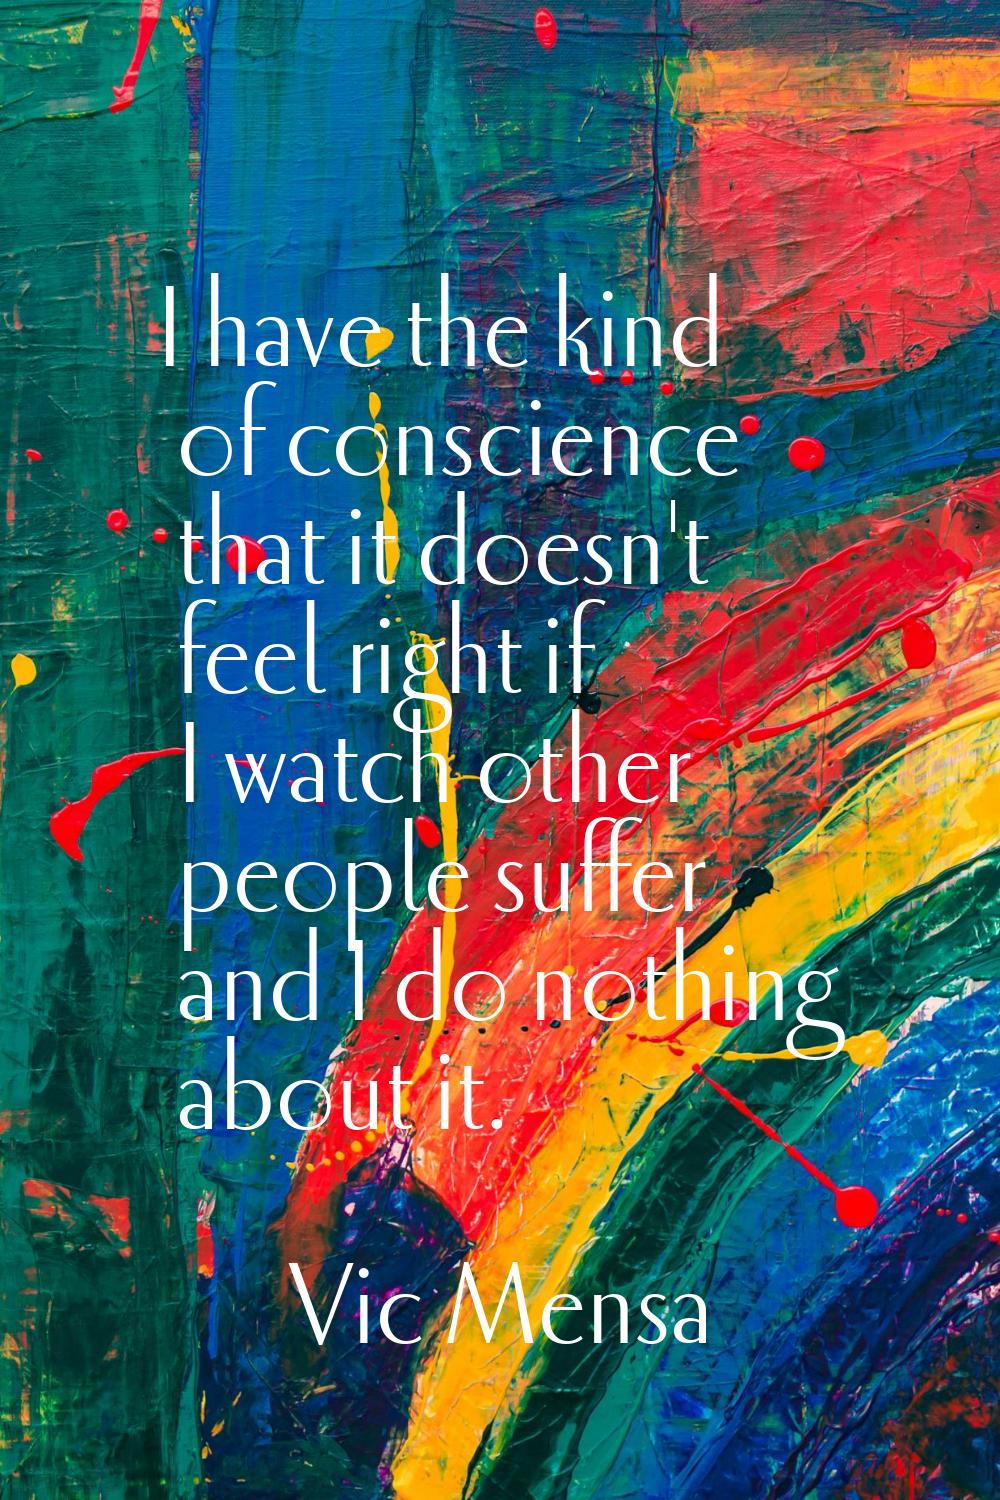 I have the kind of conscience that it doesn't feel right if I watch other people suffer and I do no